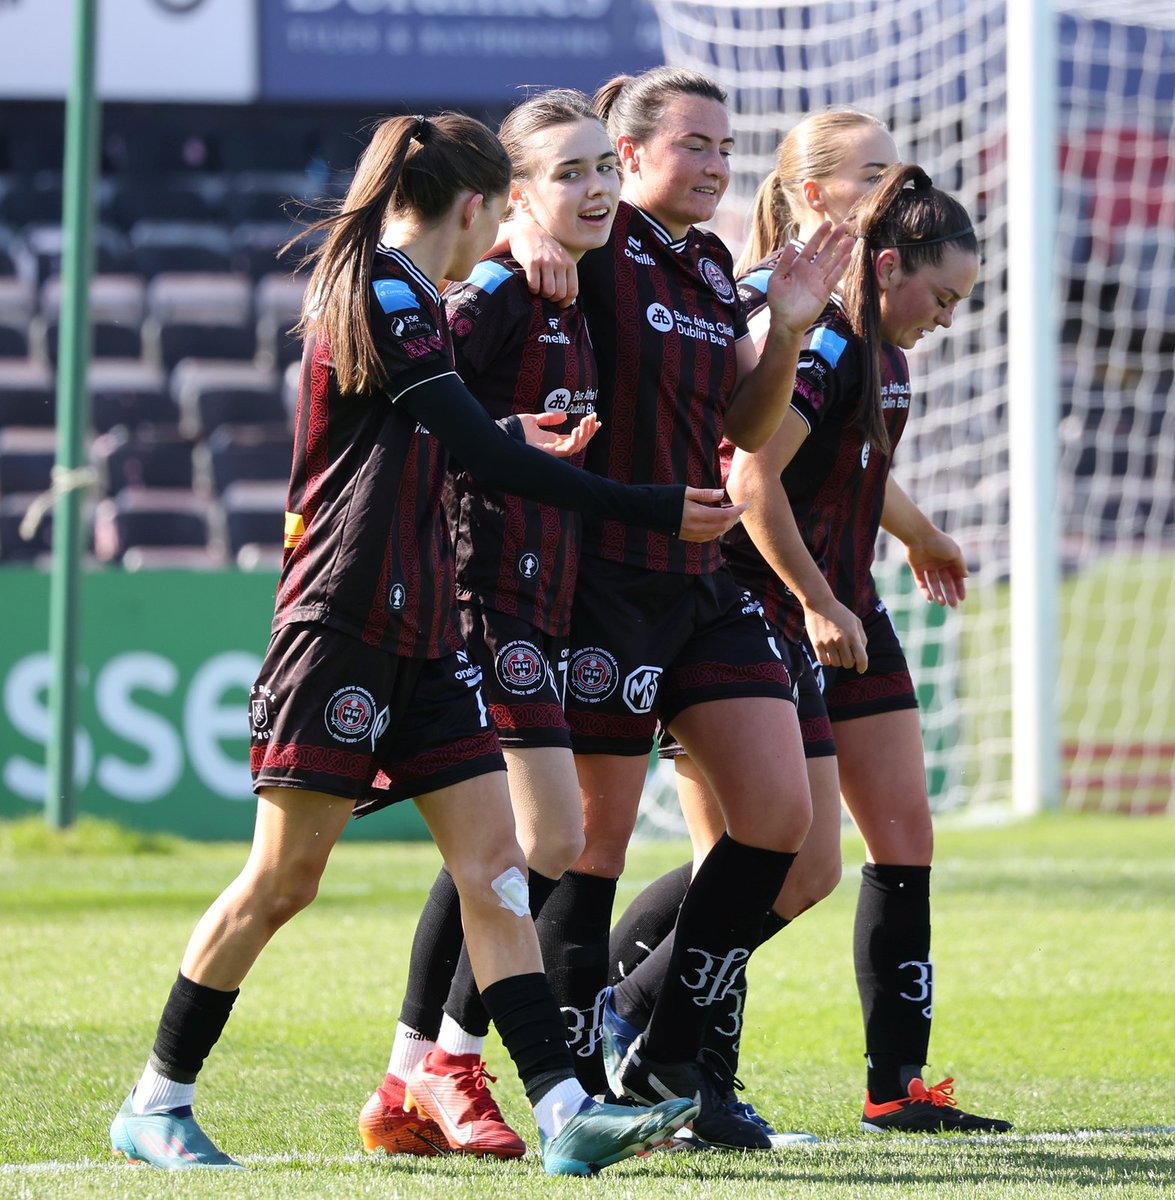 ❤️🖤 Show your support - we have some remaining player sponsorships available for the Bohemians women's first team: shop-bohemianfc.com/collections/wp…